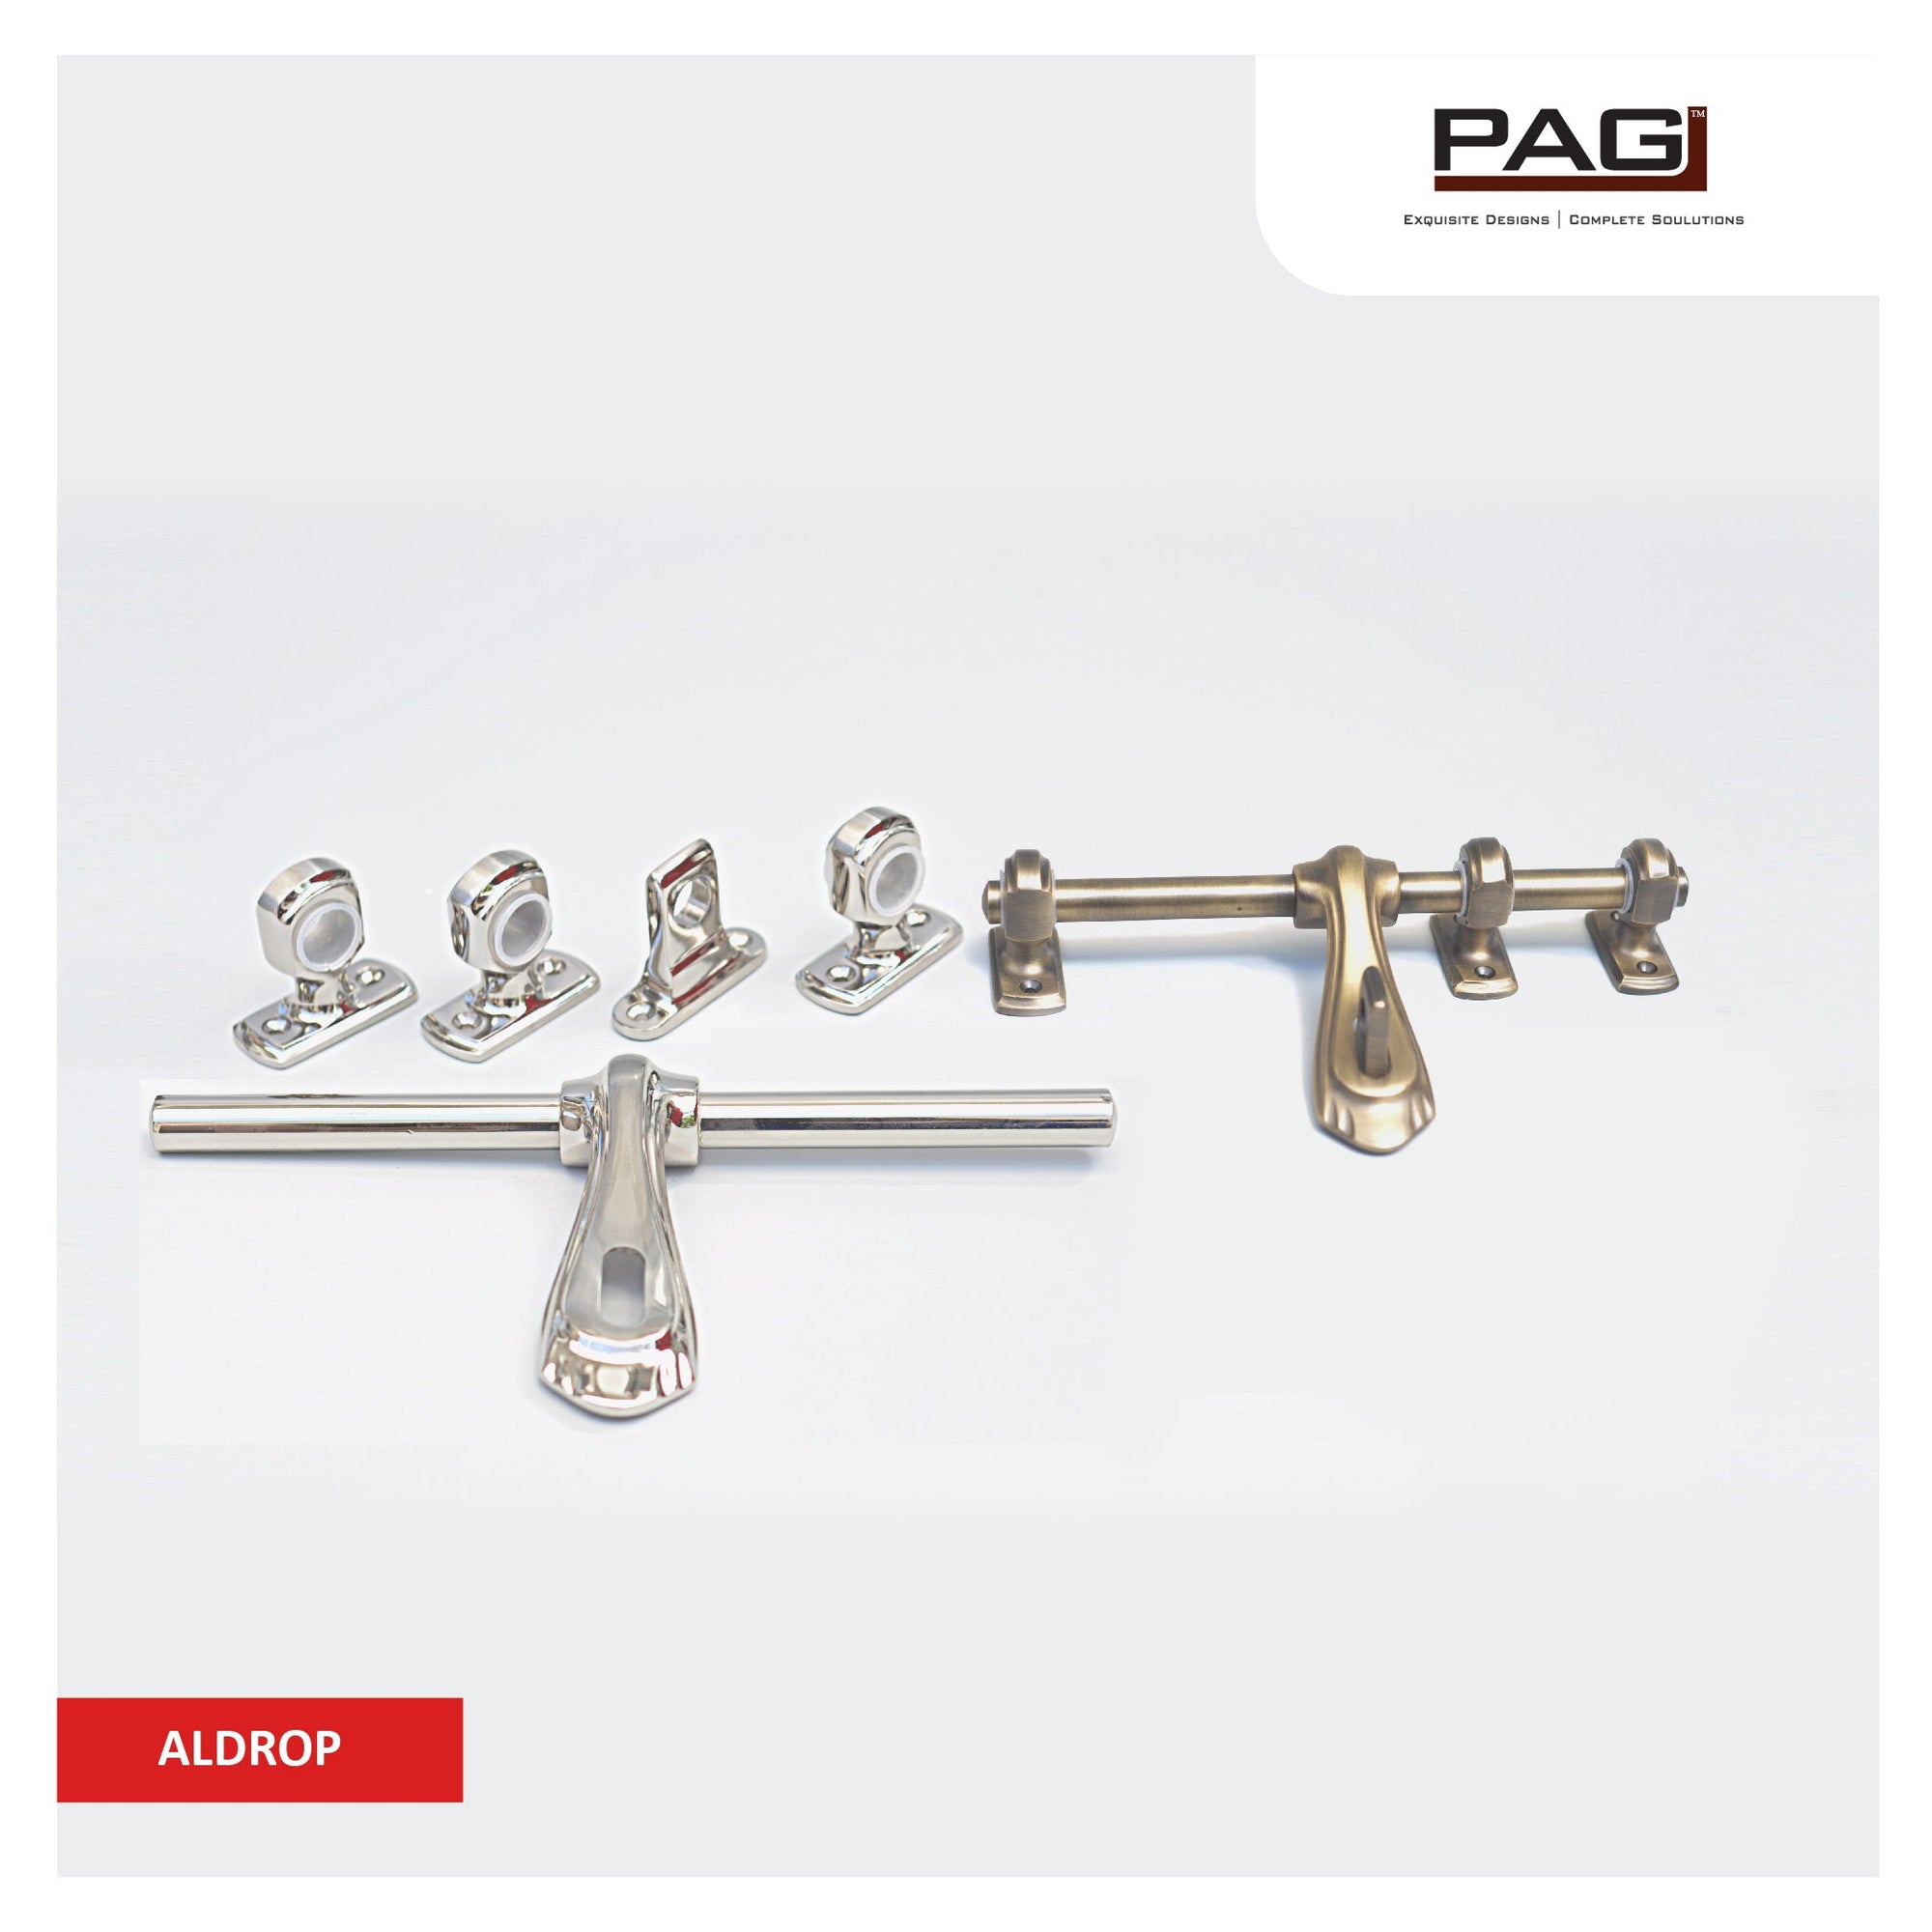 Shop the PAG Aldrop Collection - Enhance Door Functionality and Security - M. M. Noorbhoy & Co